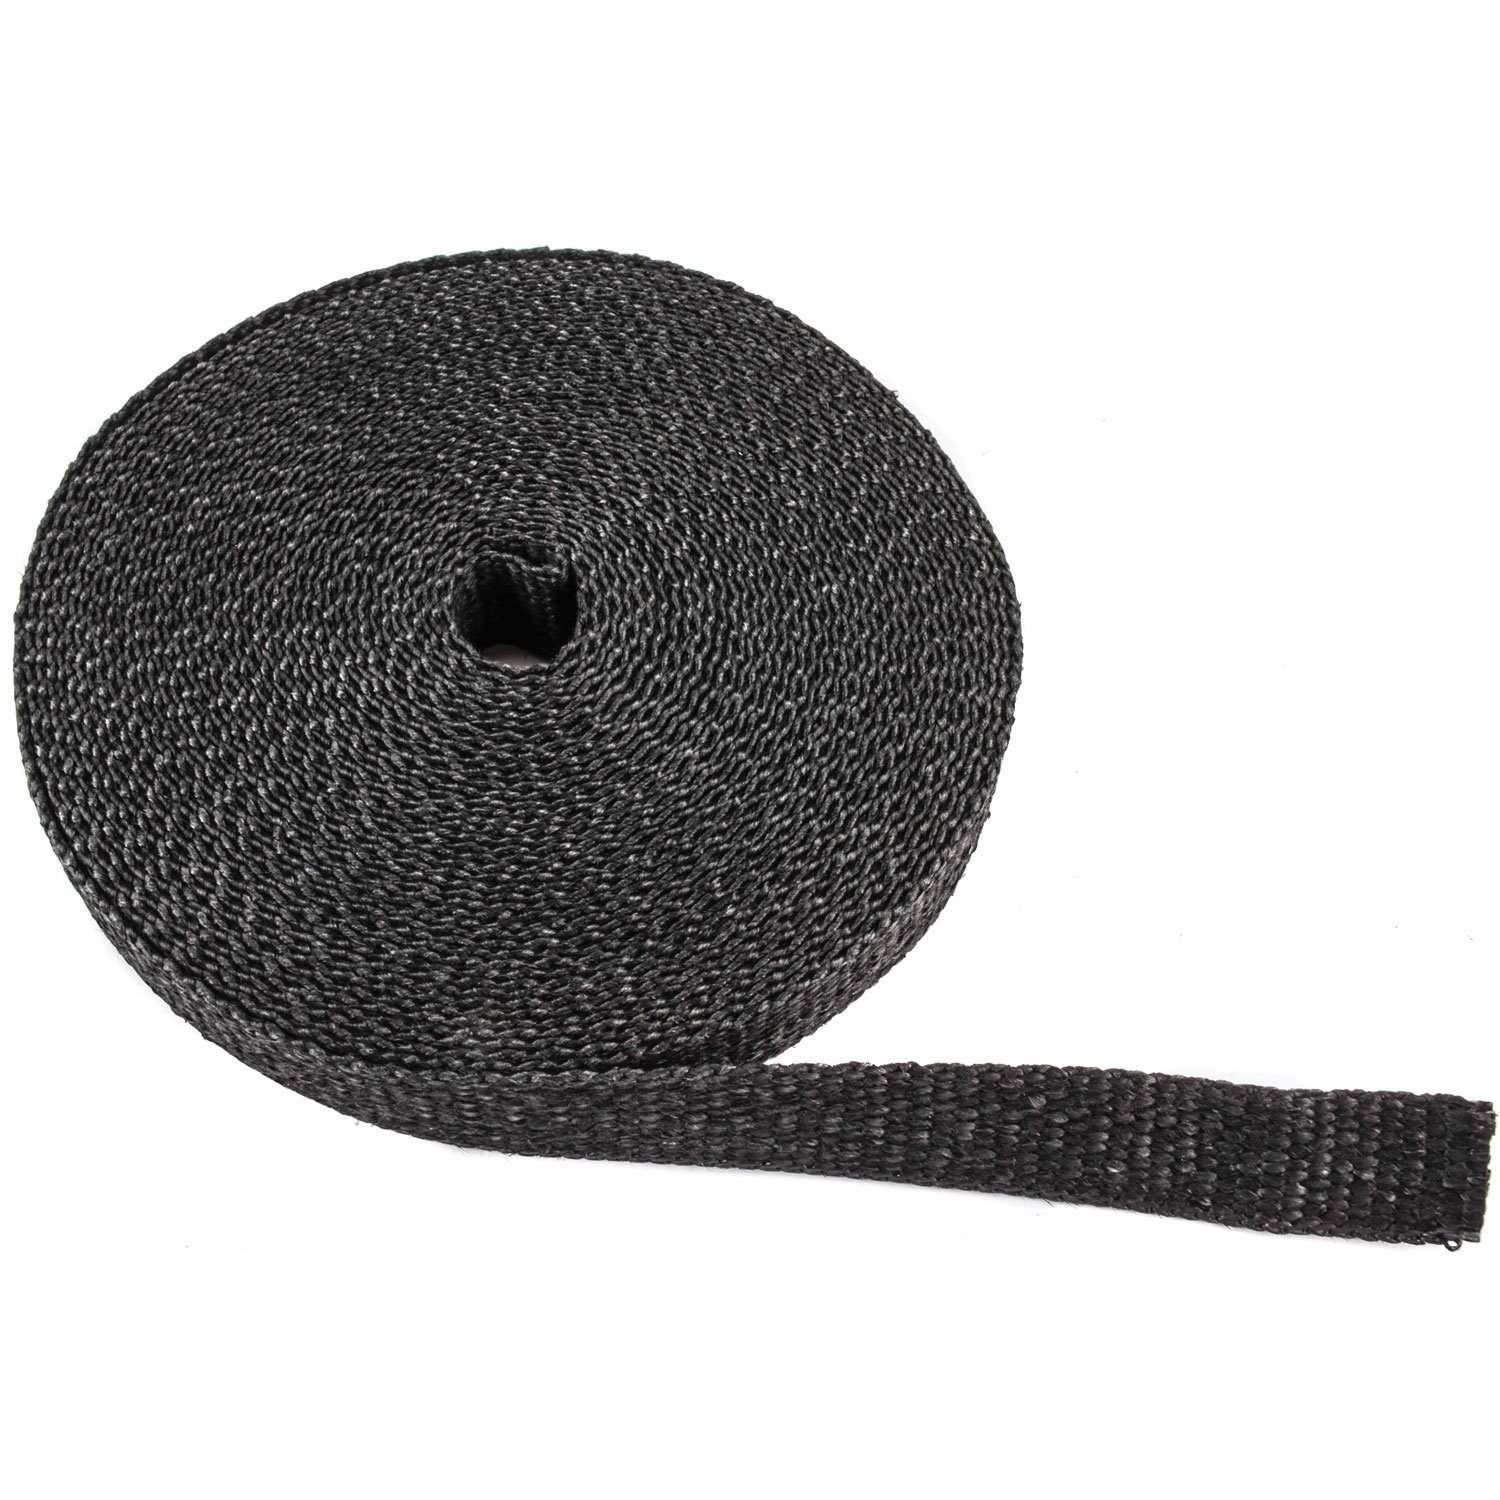 Exhaust & Header Wrap 1 in. x 50 ft. x 1/16 in. Thick